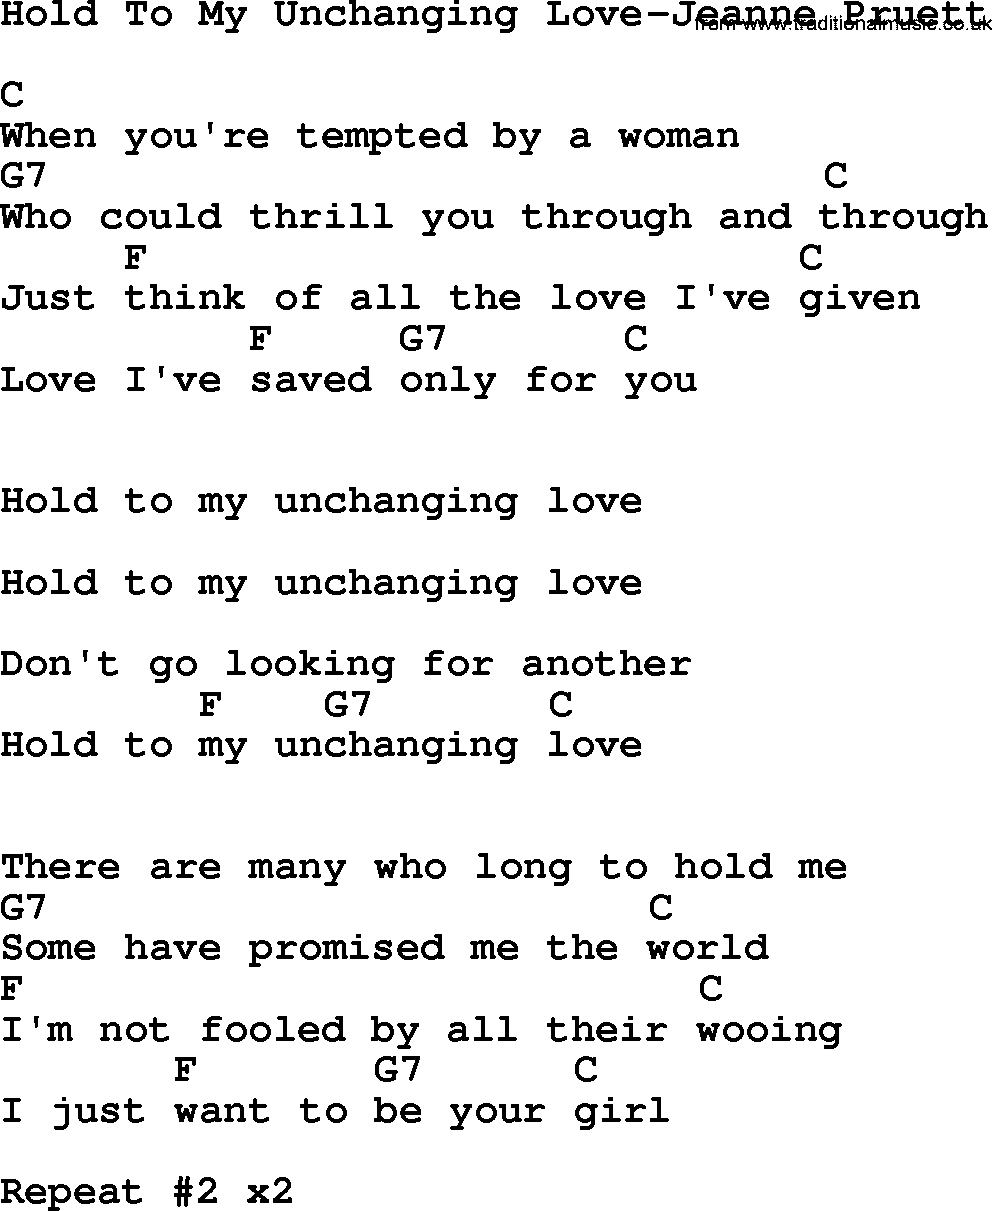 Country music song: Hold To My Unchanging Love-Jeanne Pruett lyrics and chords